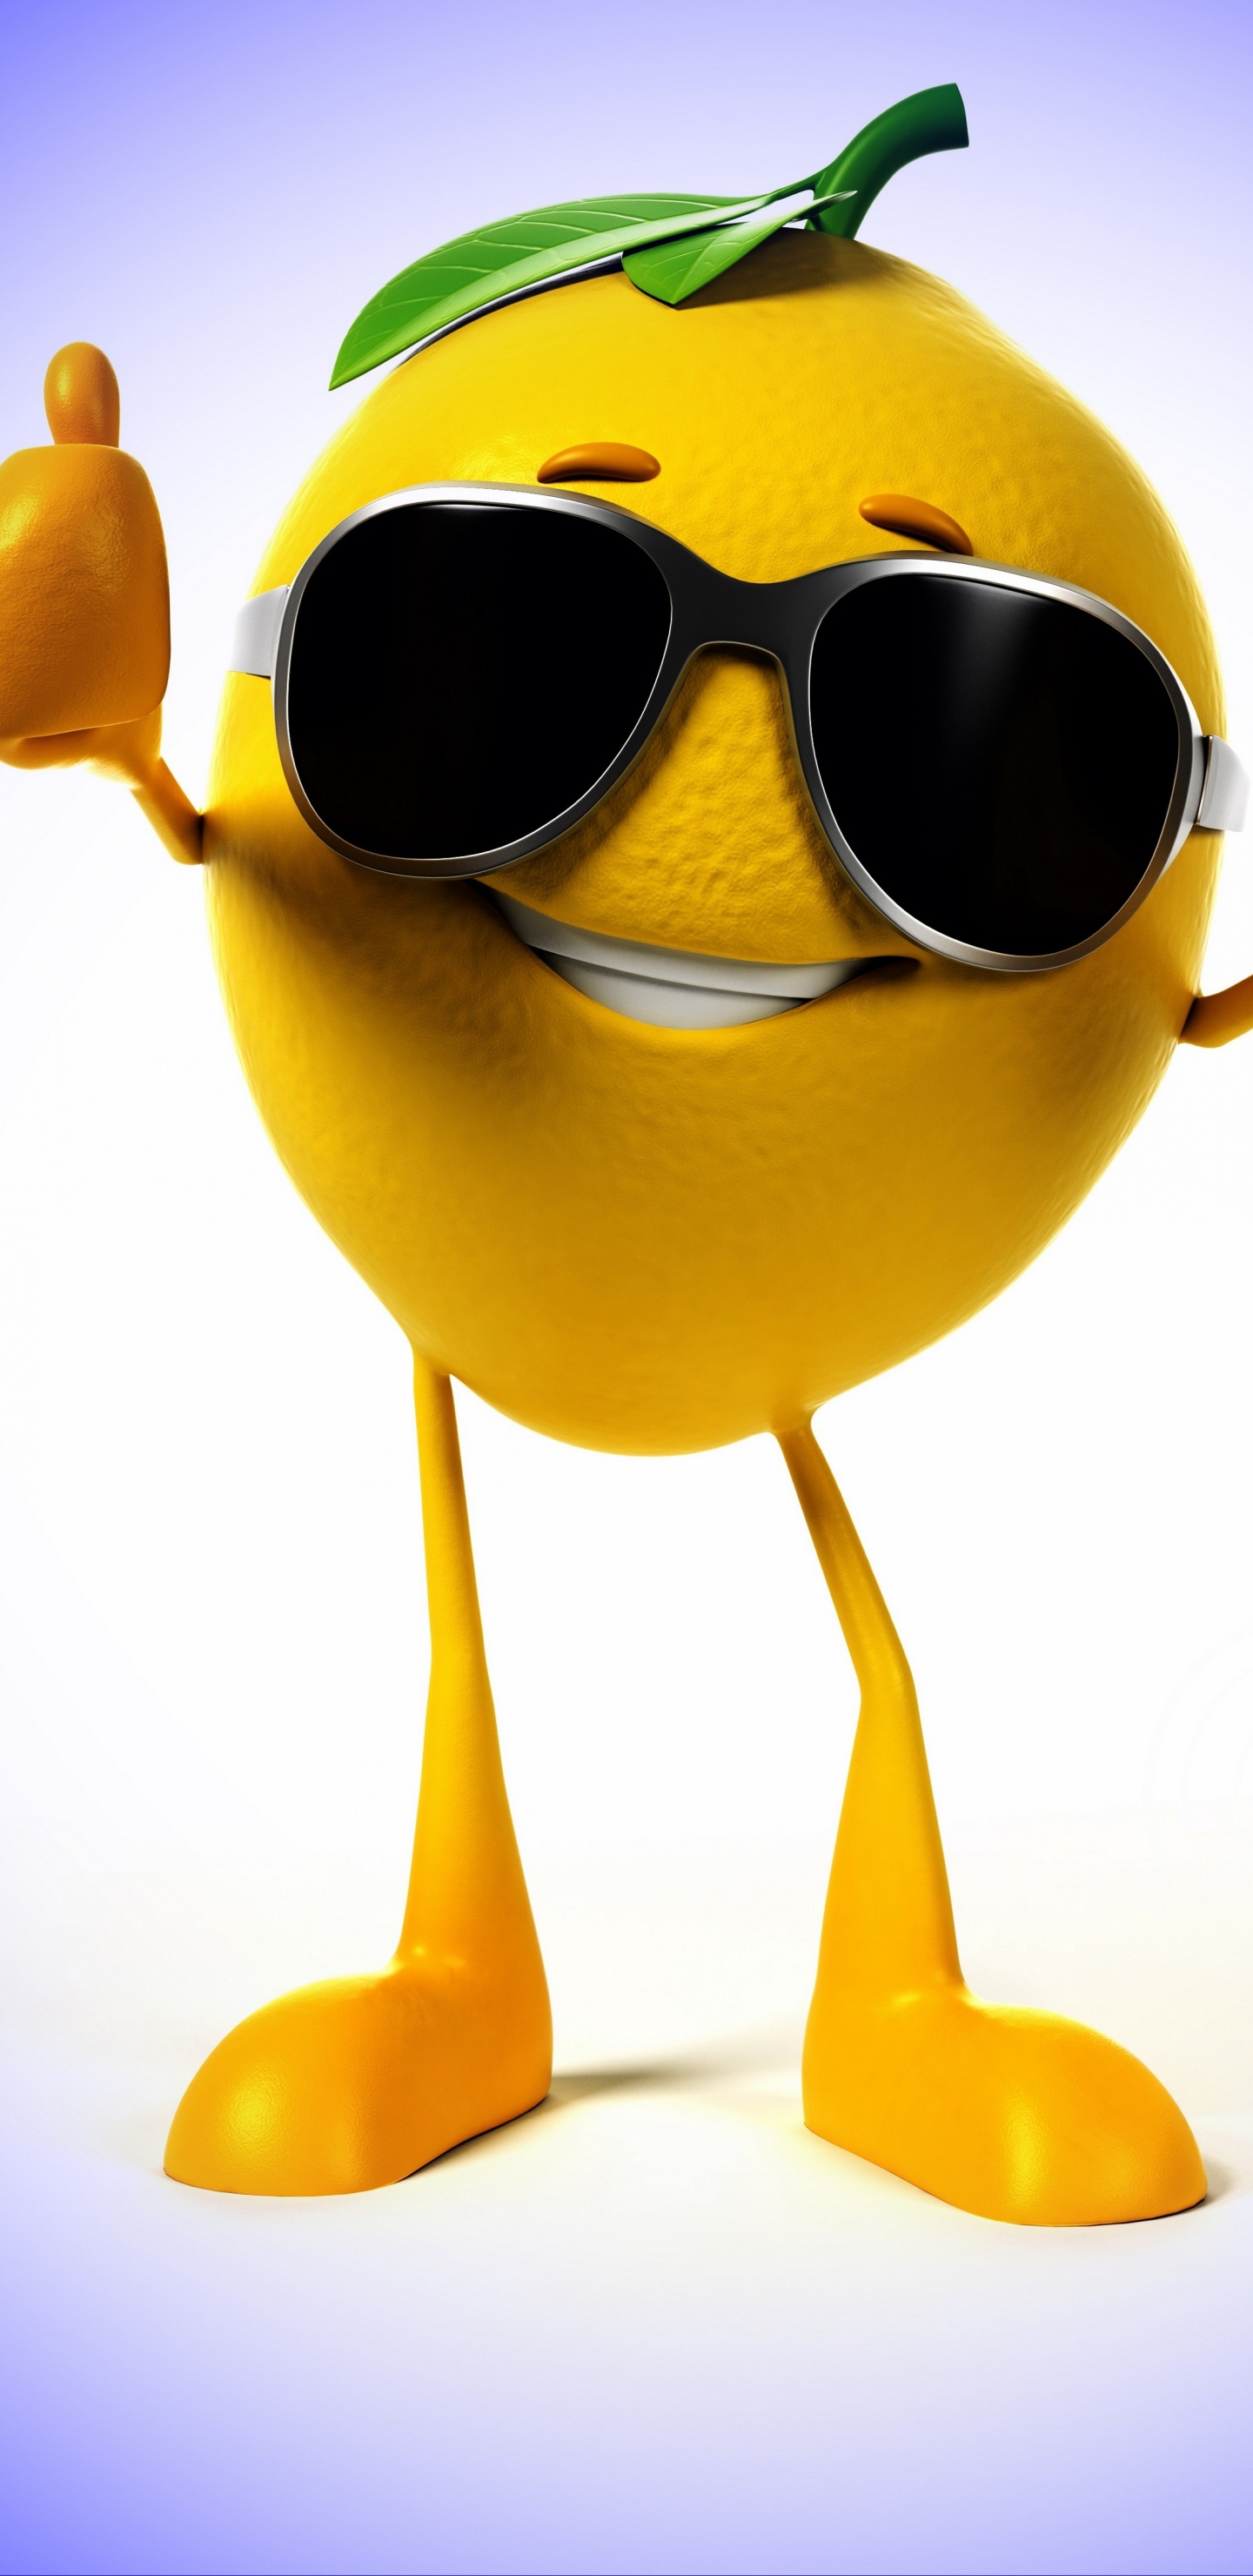 Yellow and Green Frog Wearing Sunglasses. Wallpaper in 1440x2960 Resolution